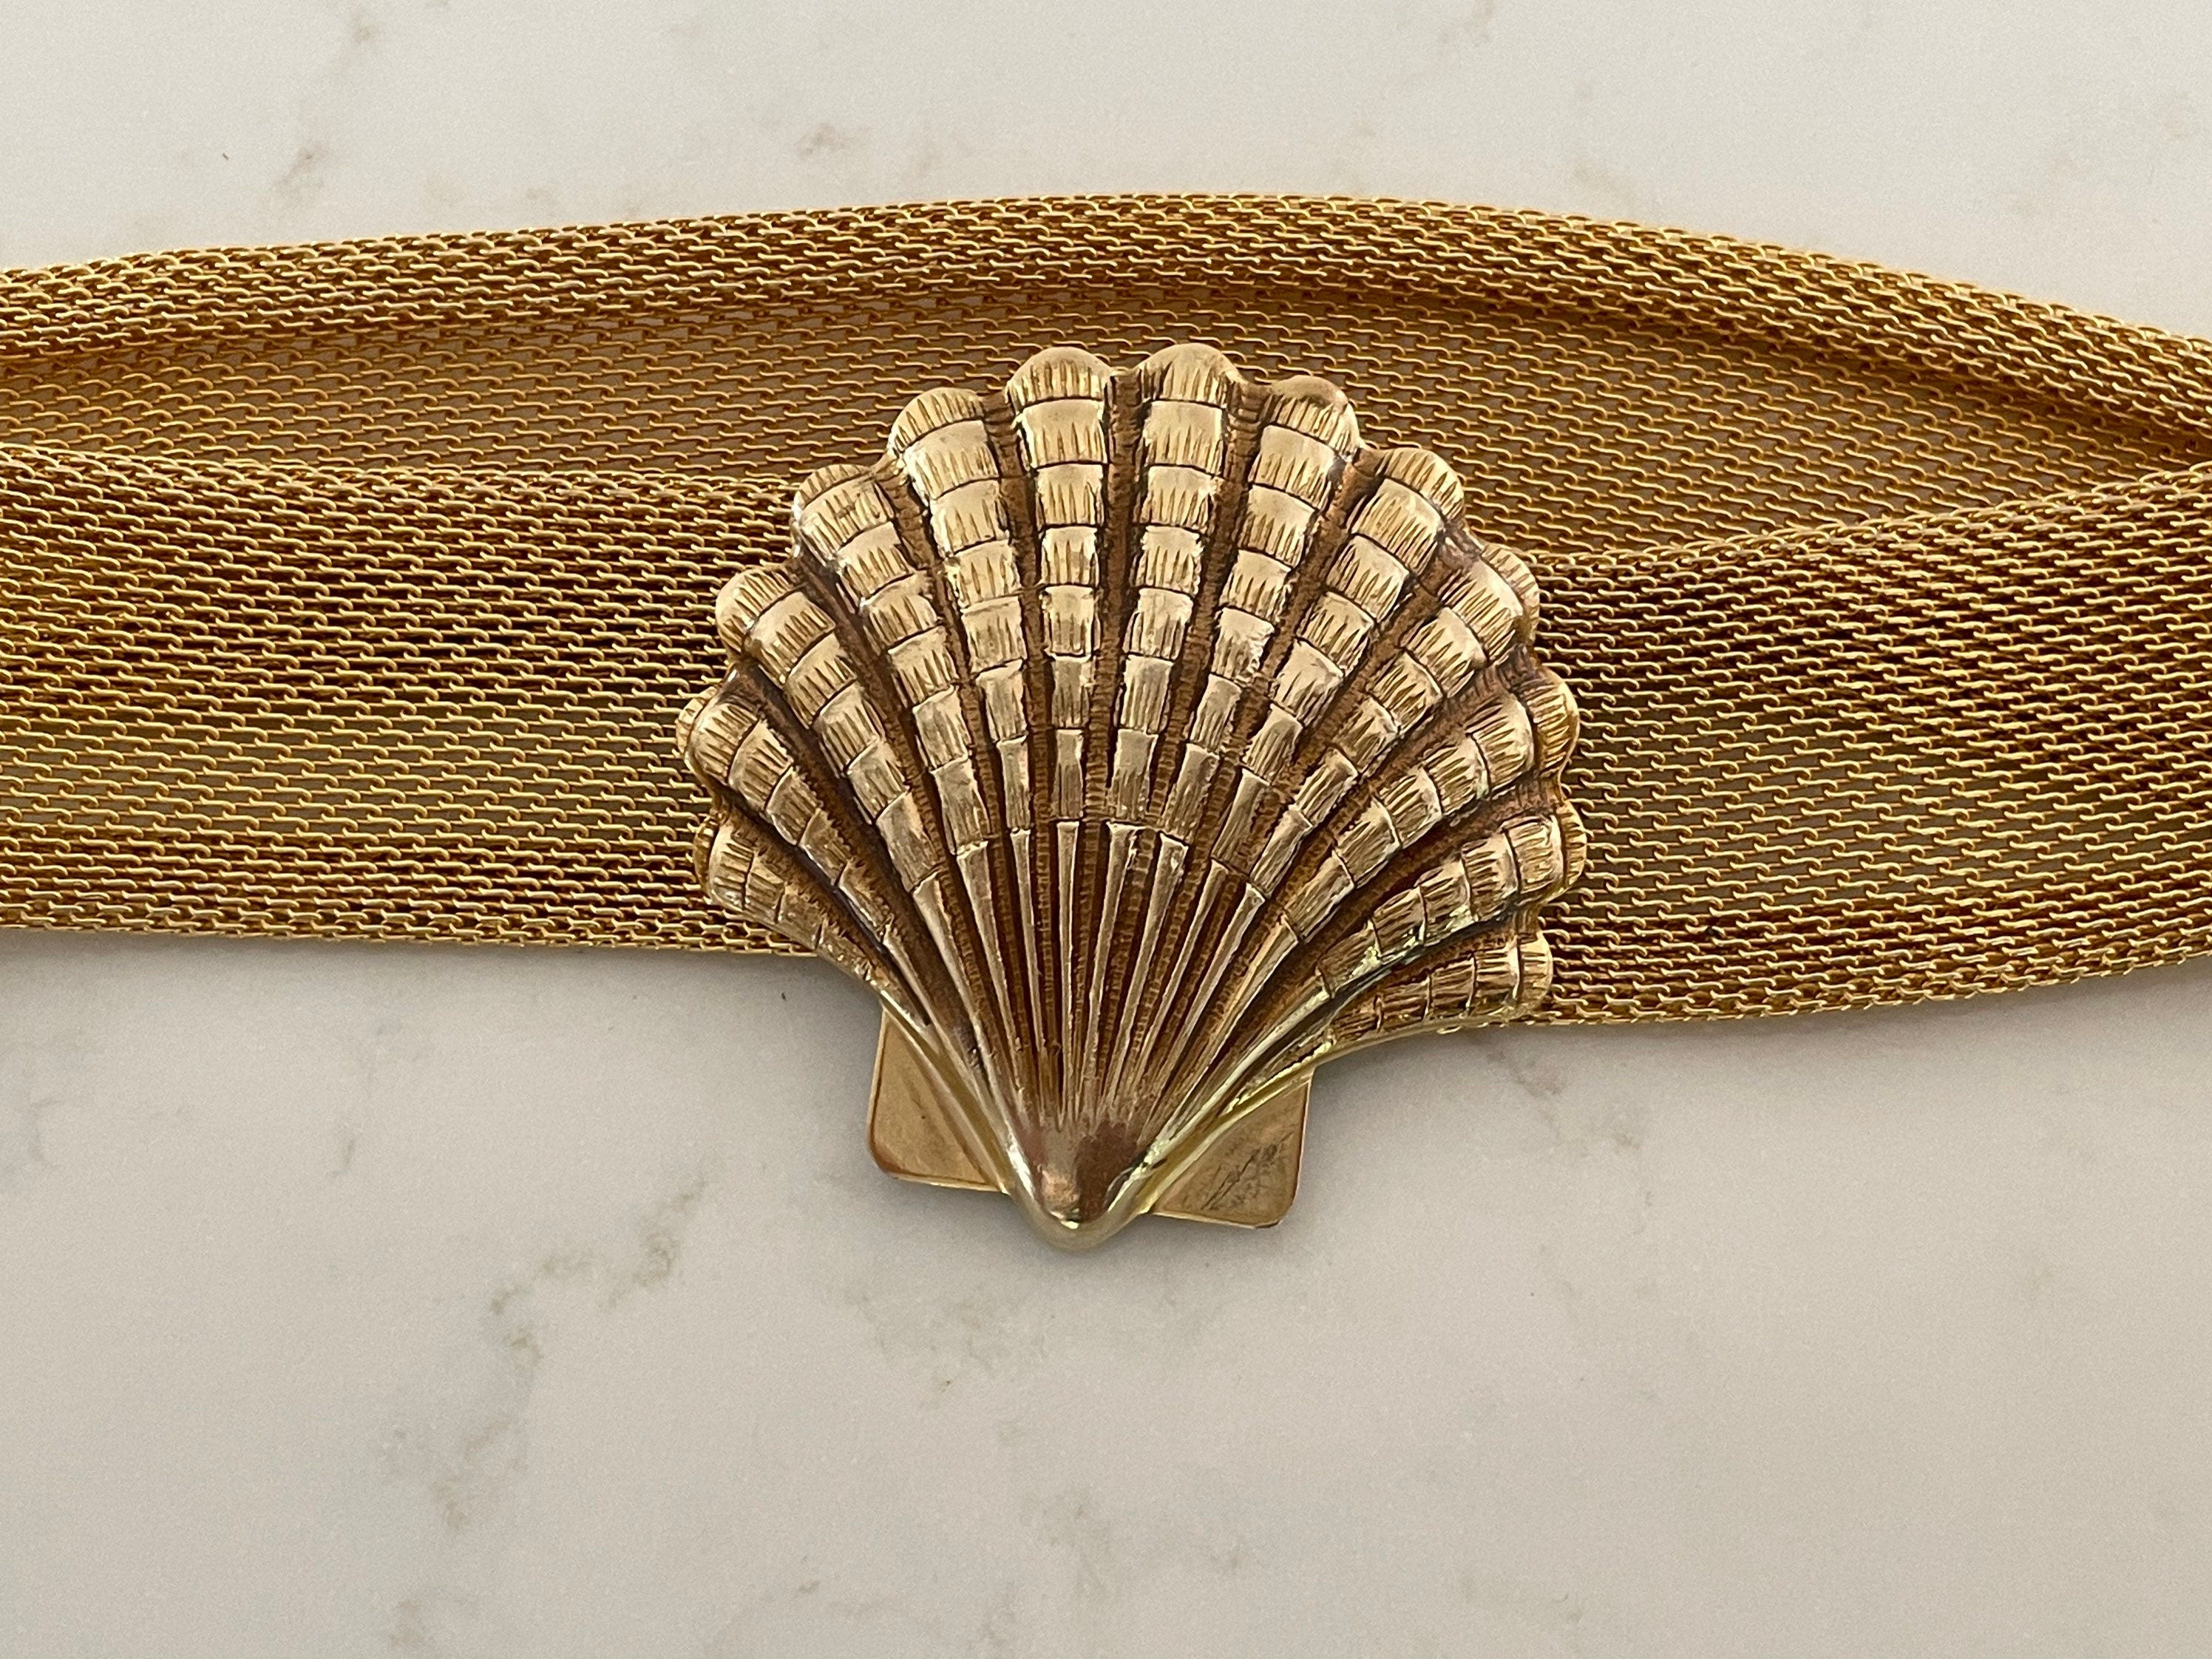 UNUSED 90s Gold Chain Belt With Real Seashell 24K Gold Trim 